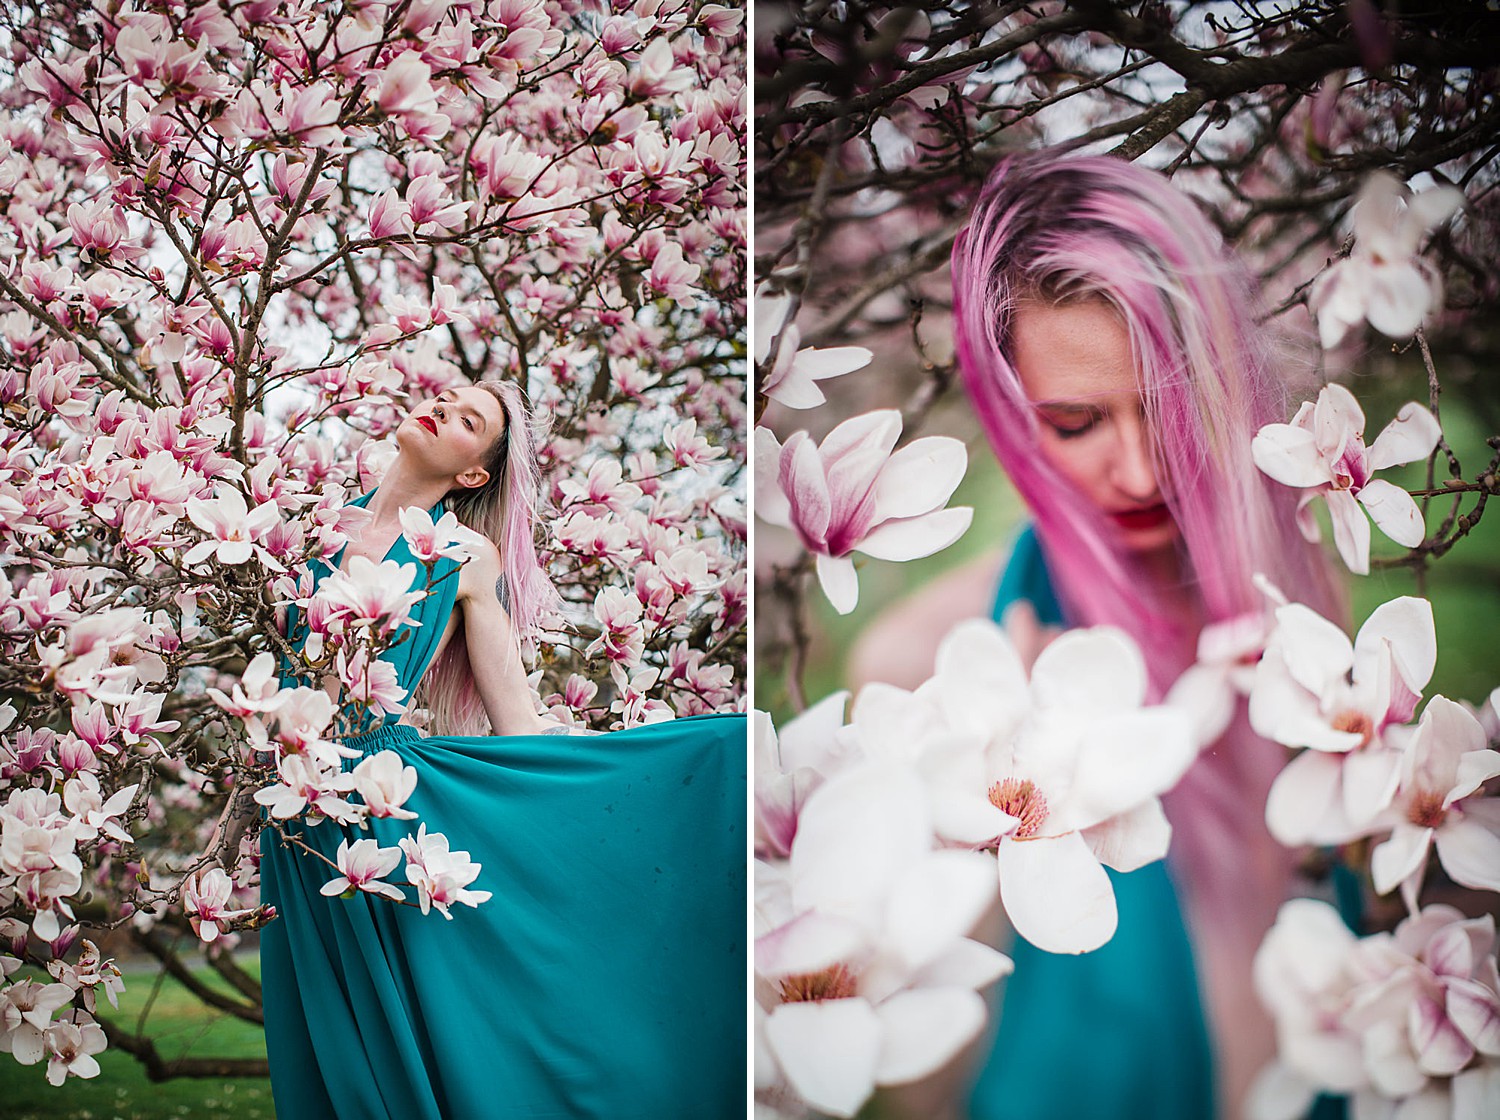  Portrait photo of a young woman with pink hair and a teal dress standing in a tree of magnolia blossoms. 